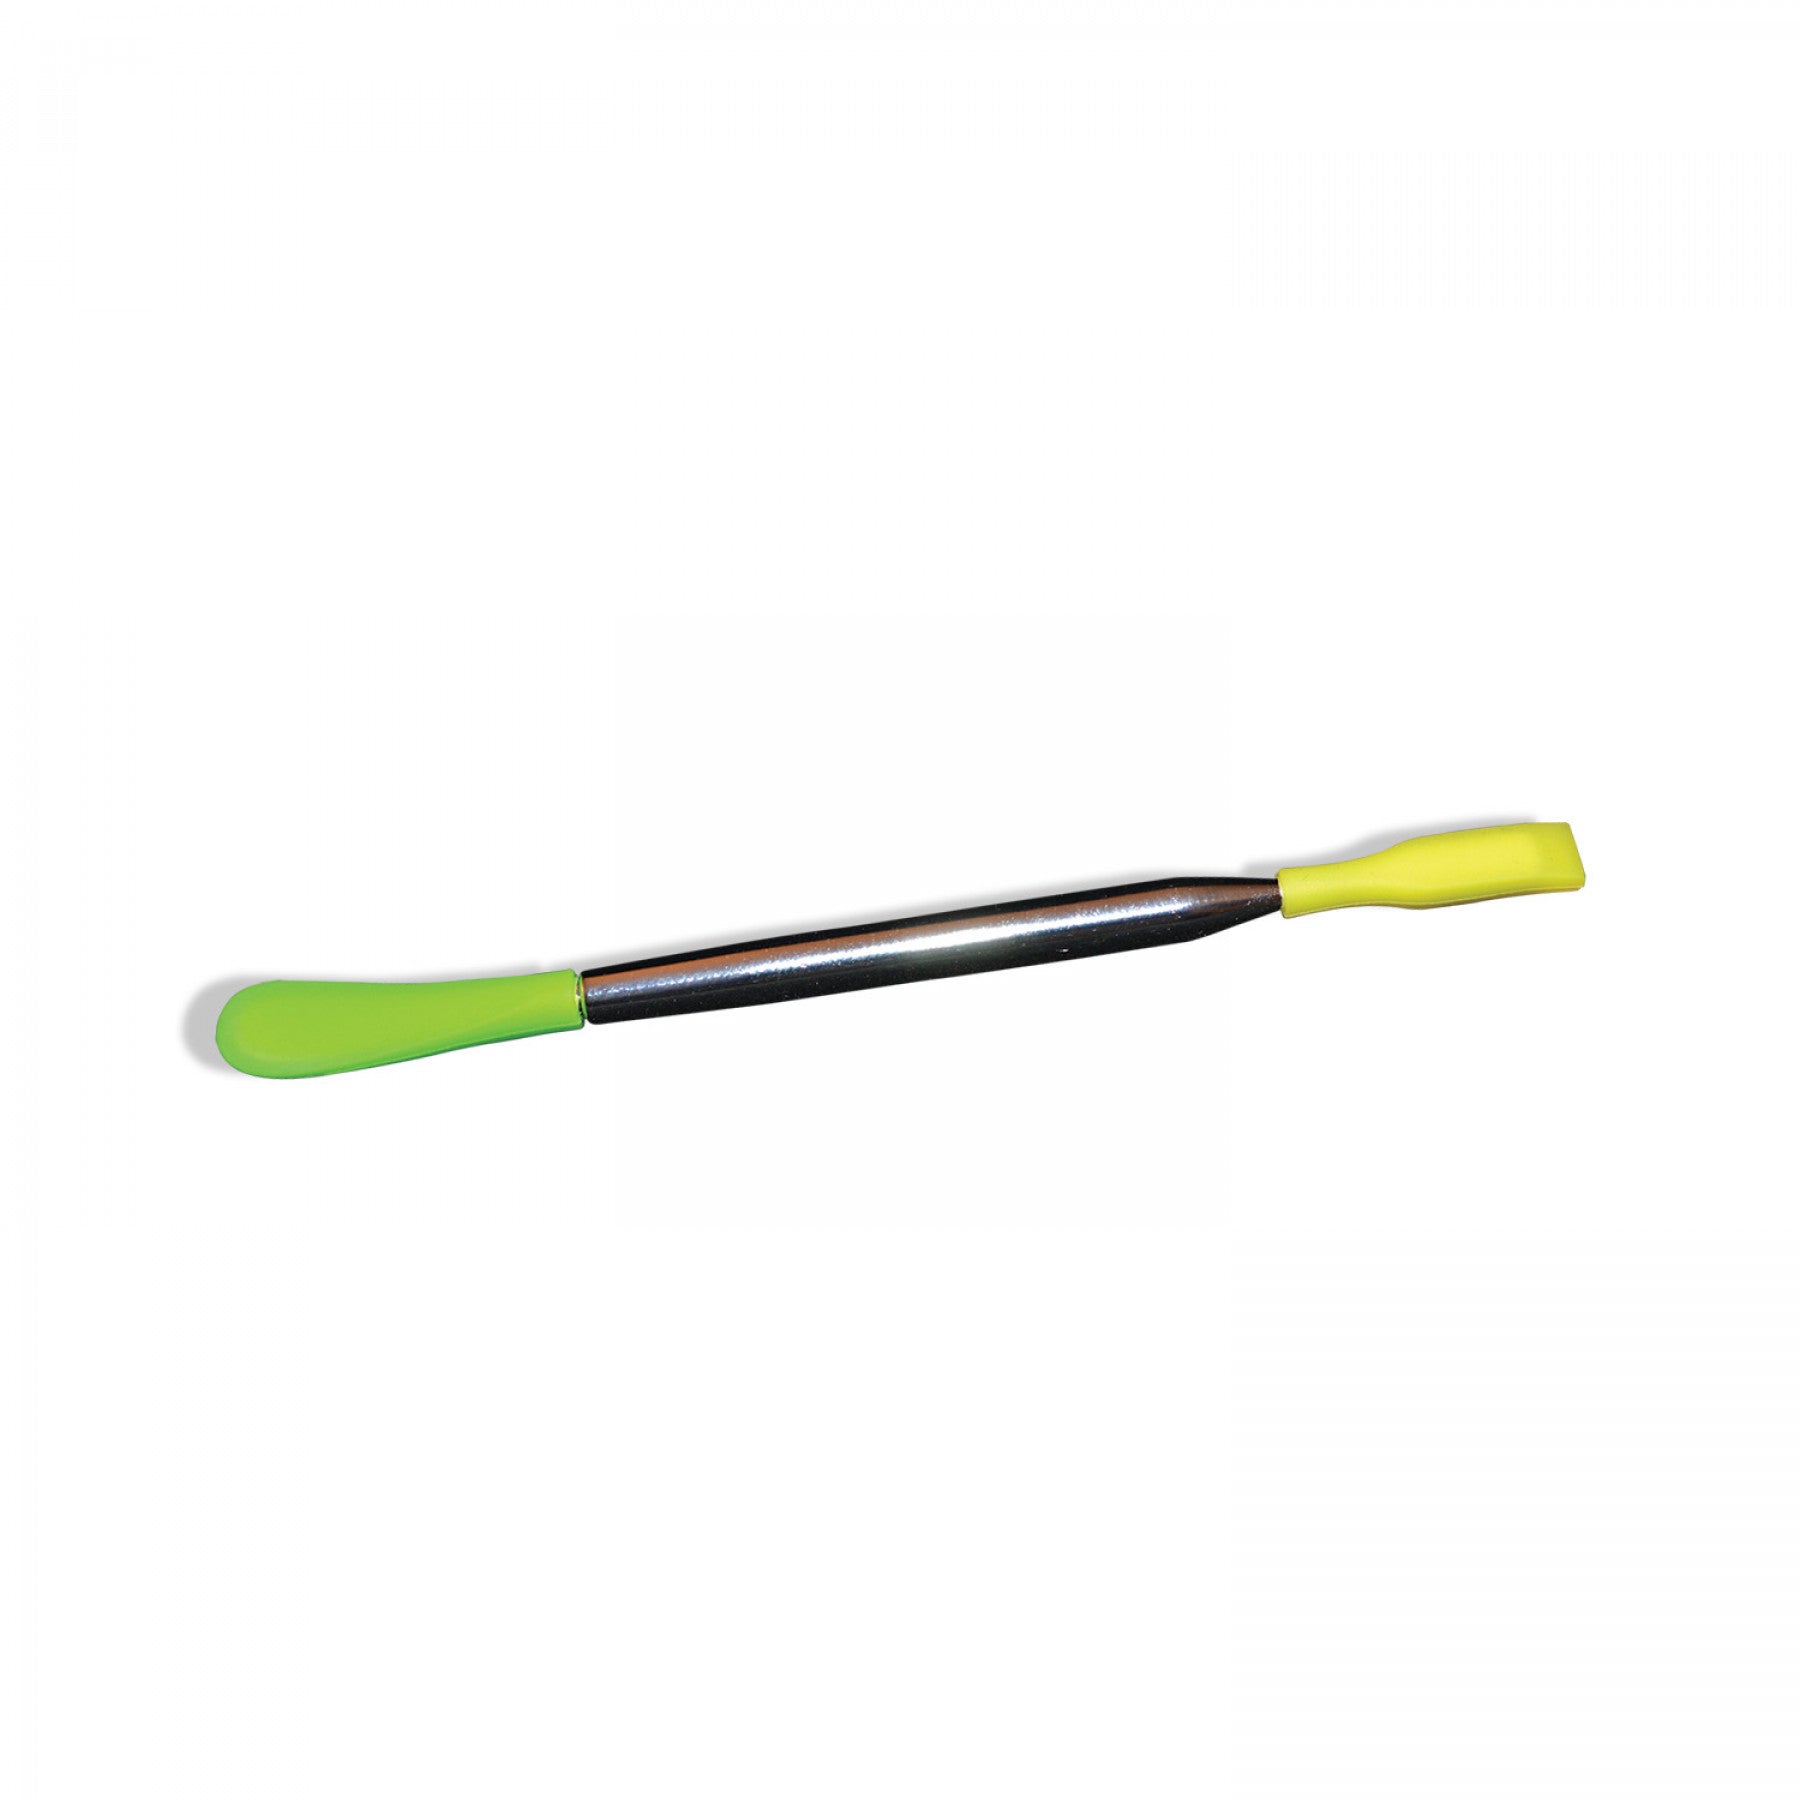 Metal tool with green and yellow silicone tips